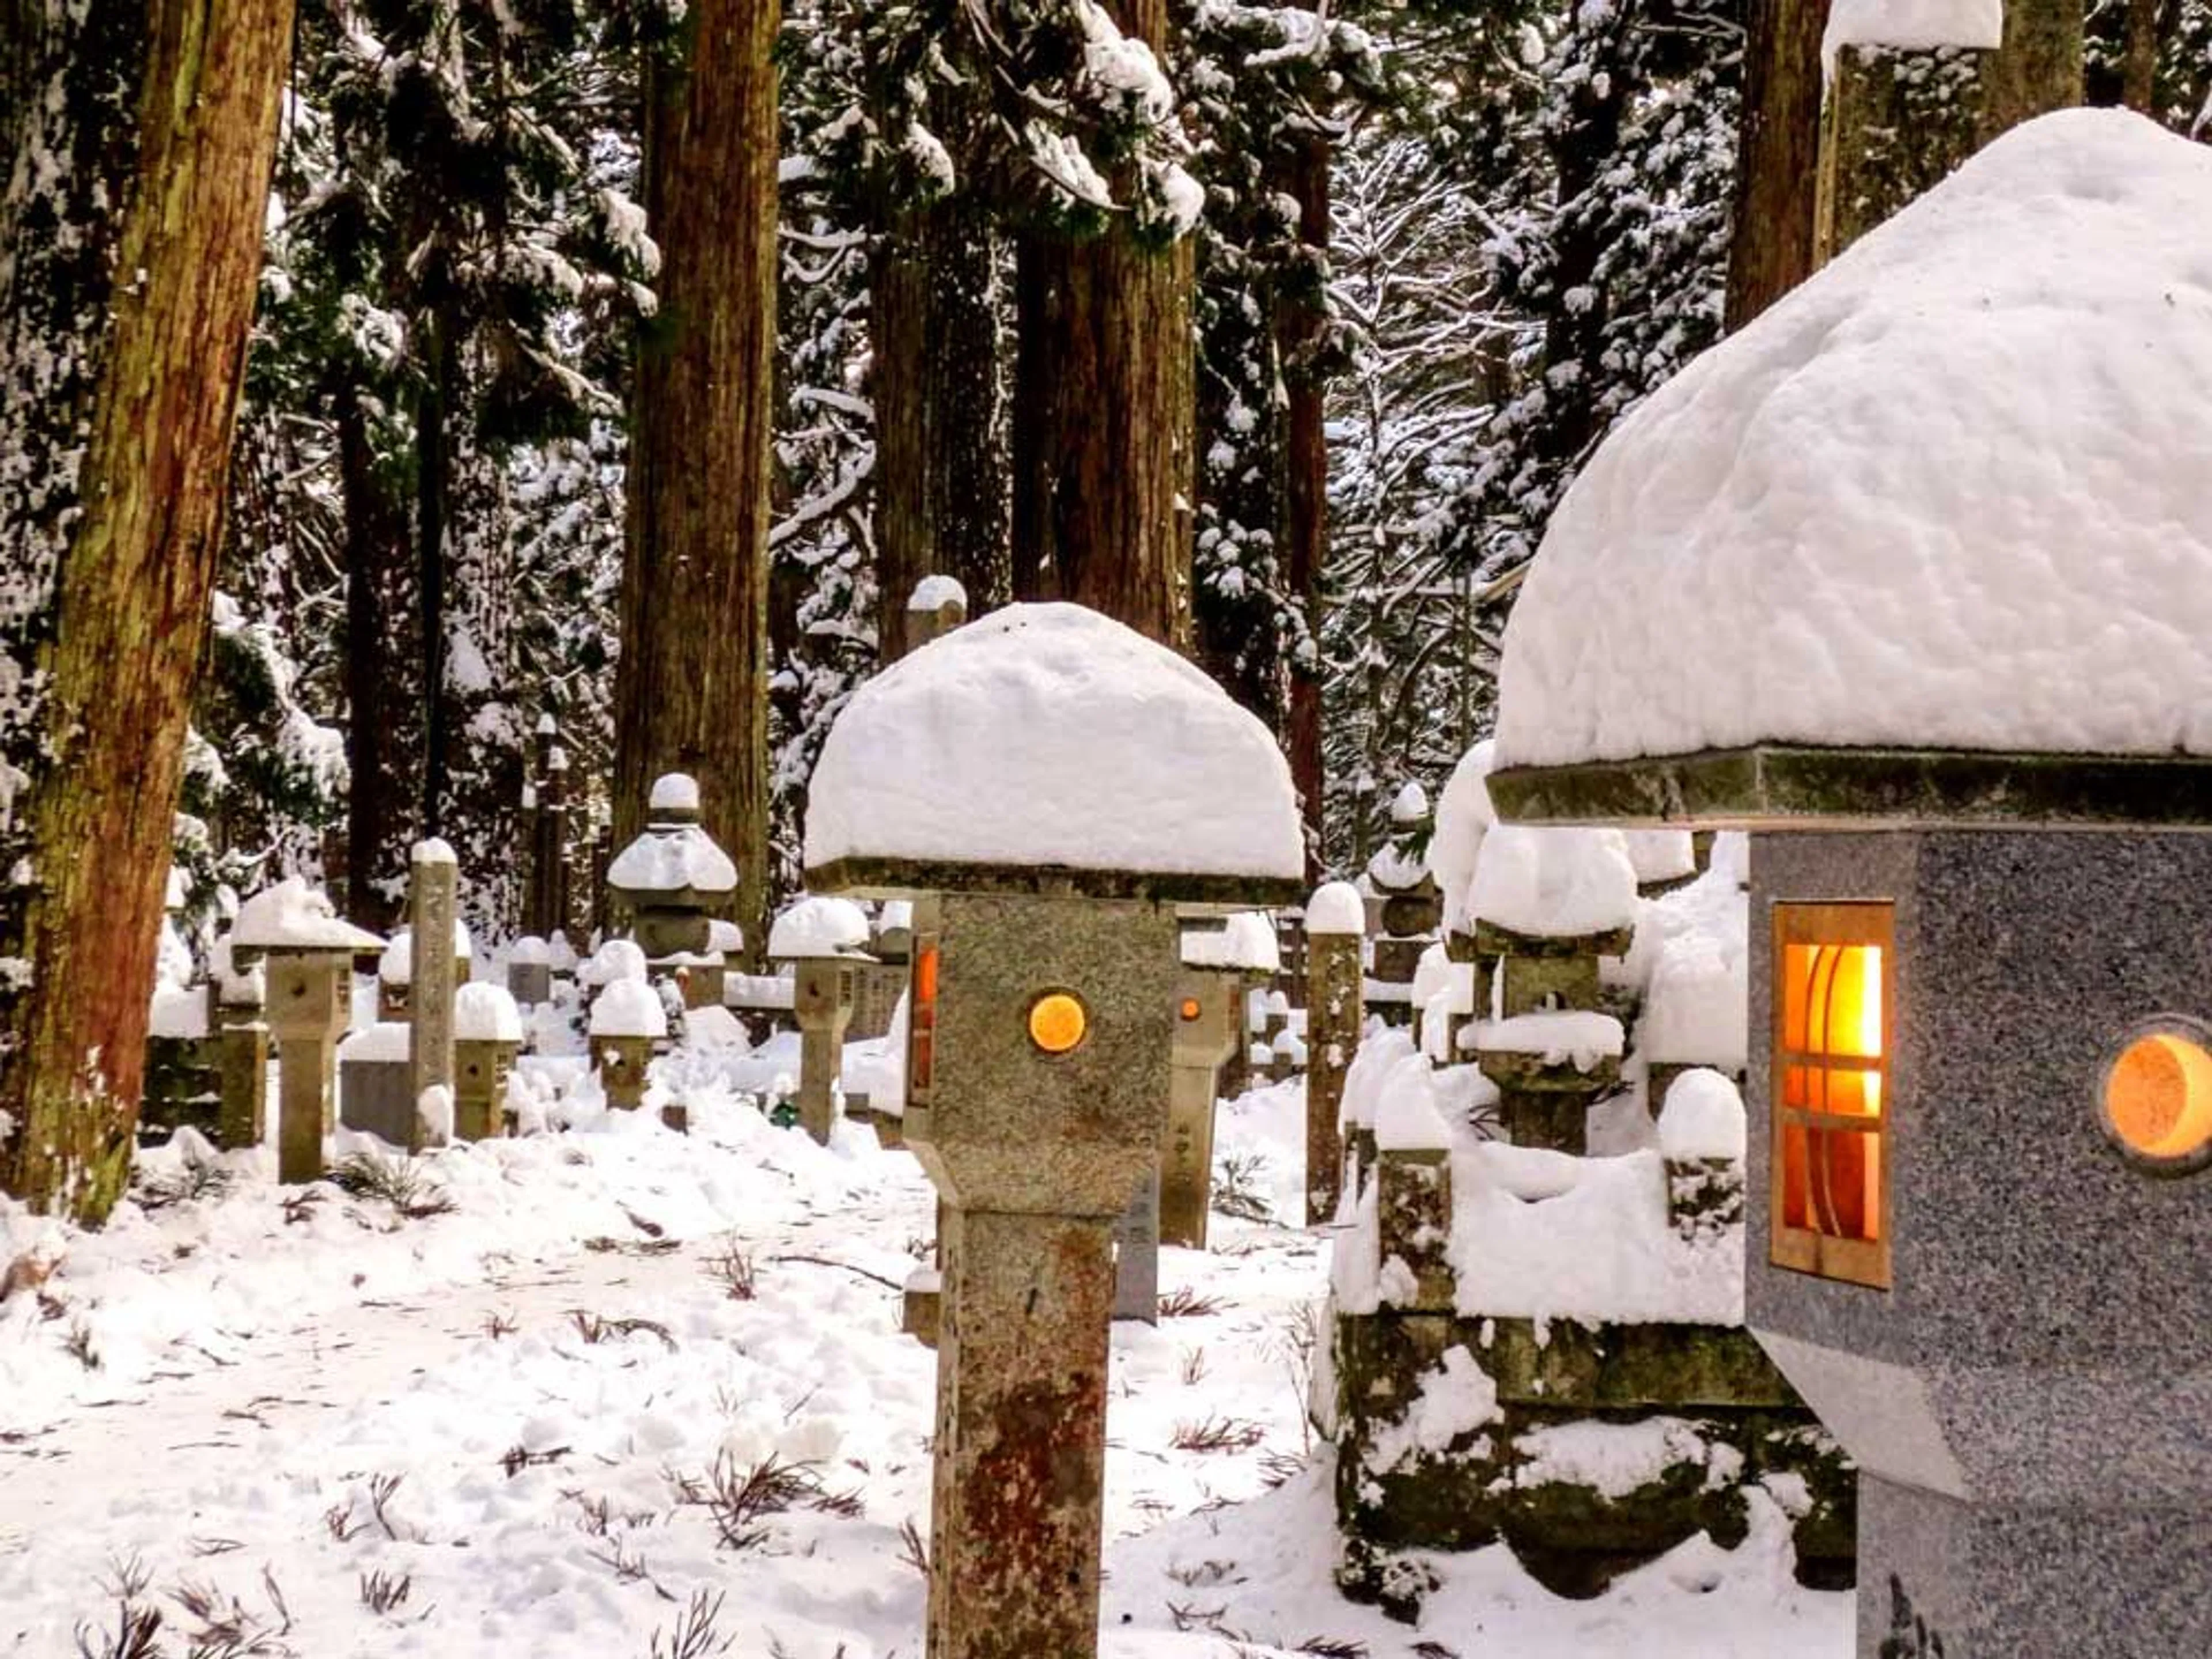 Snow sits on the lanterns lining the main path at Okunoin.